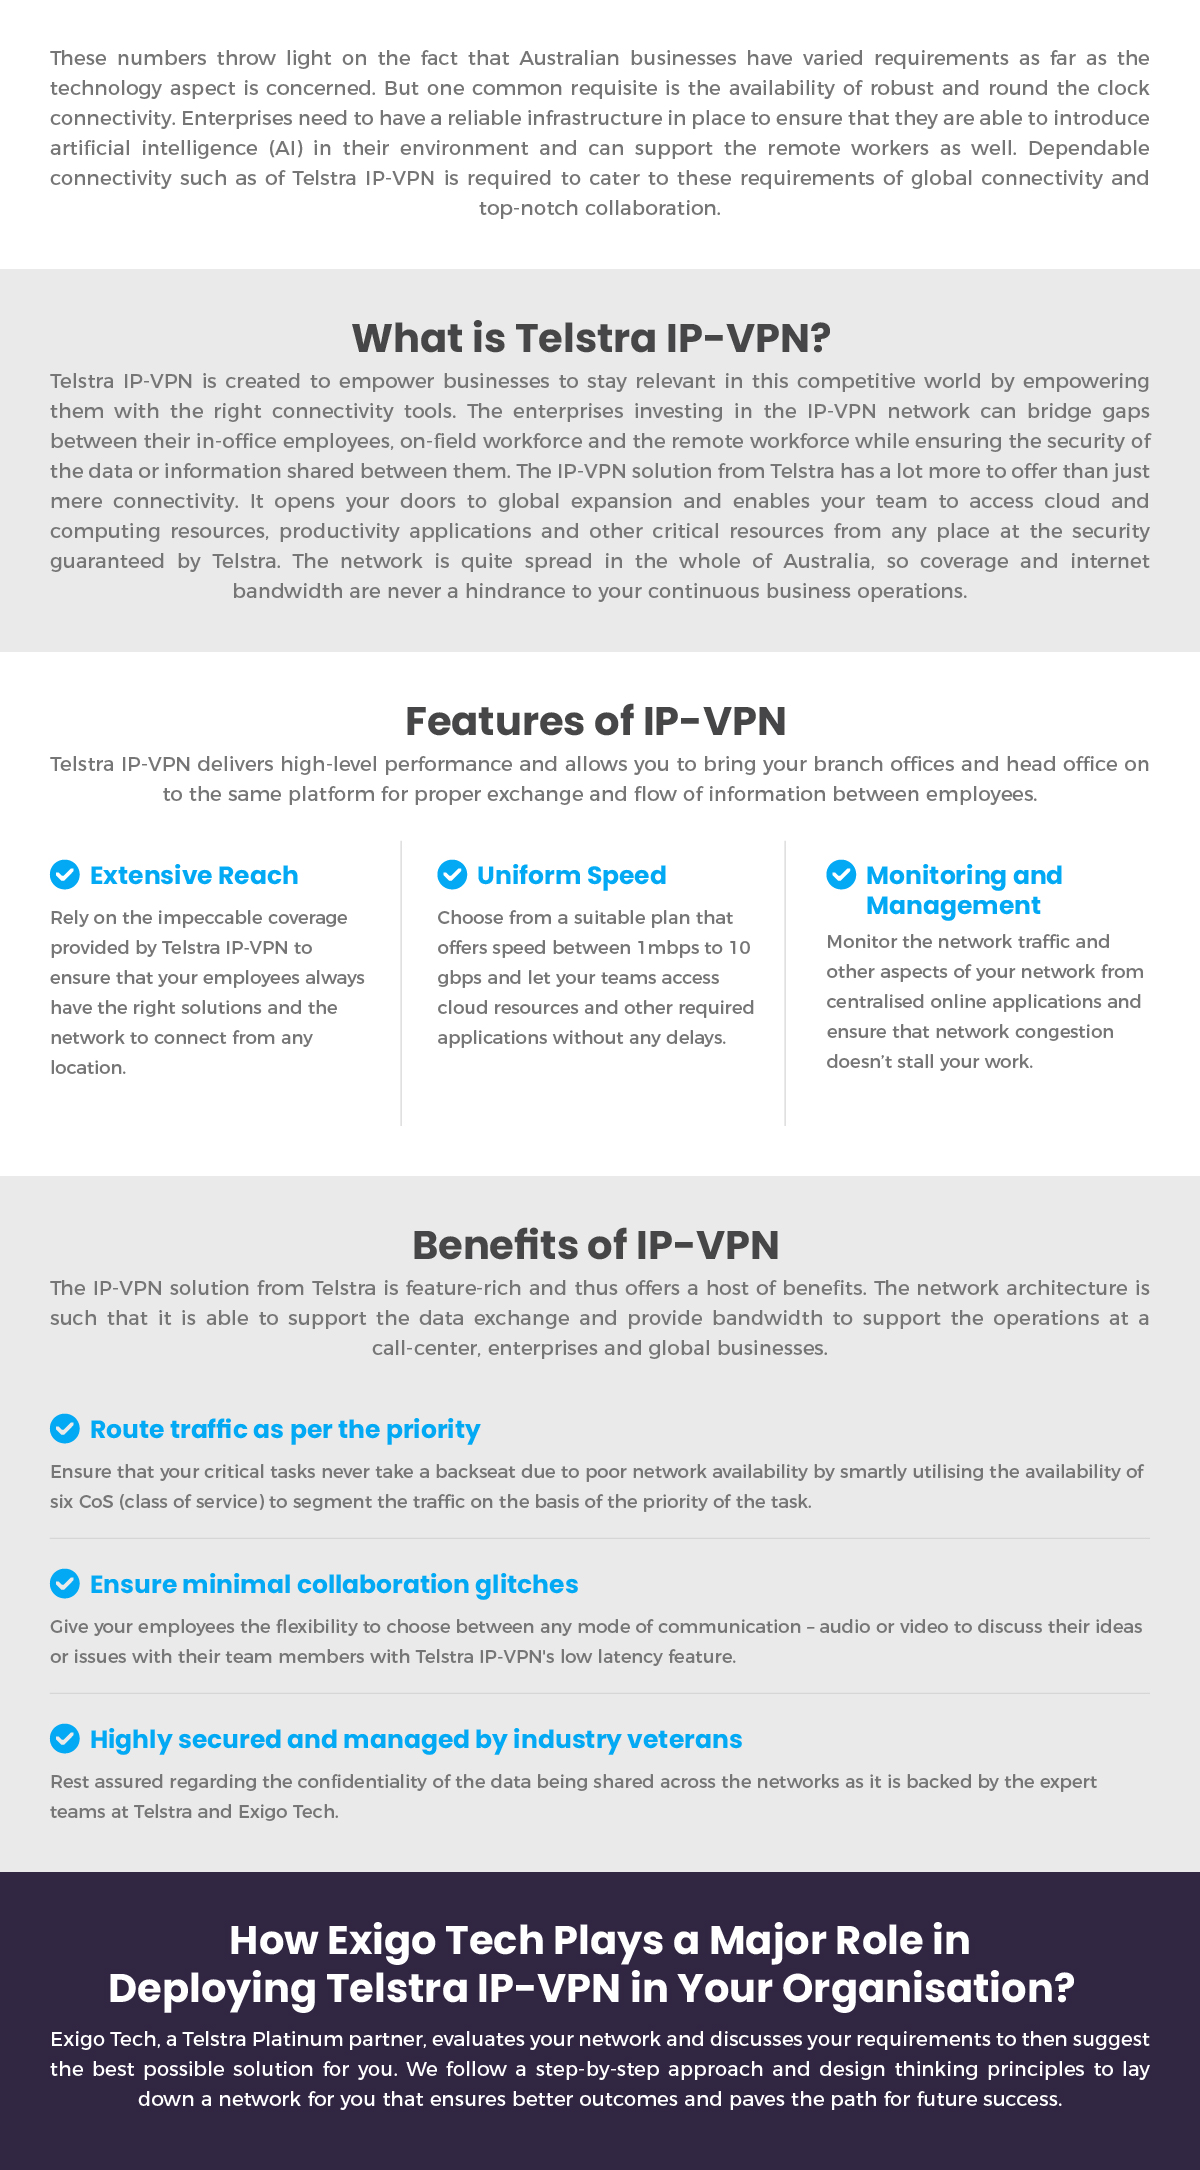 what is telstra IP-VPN, benefits and features?